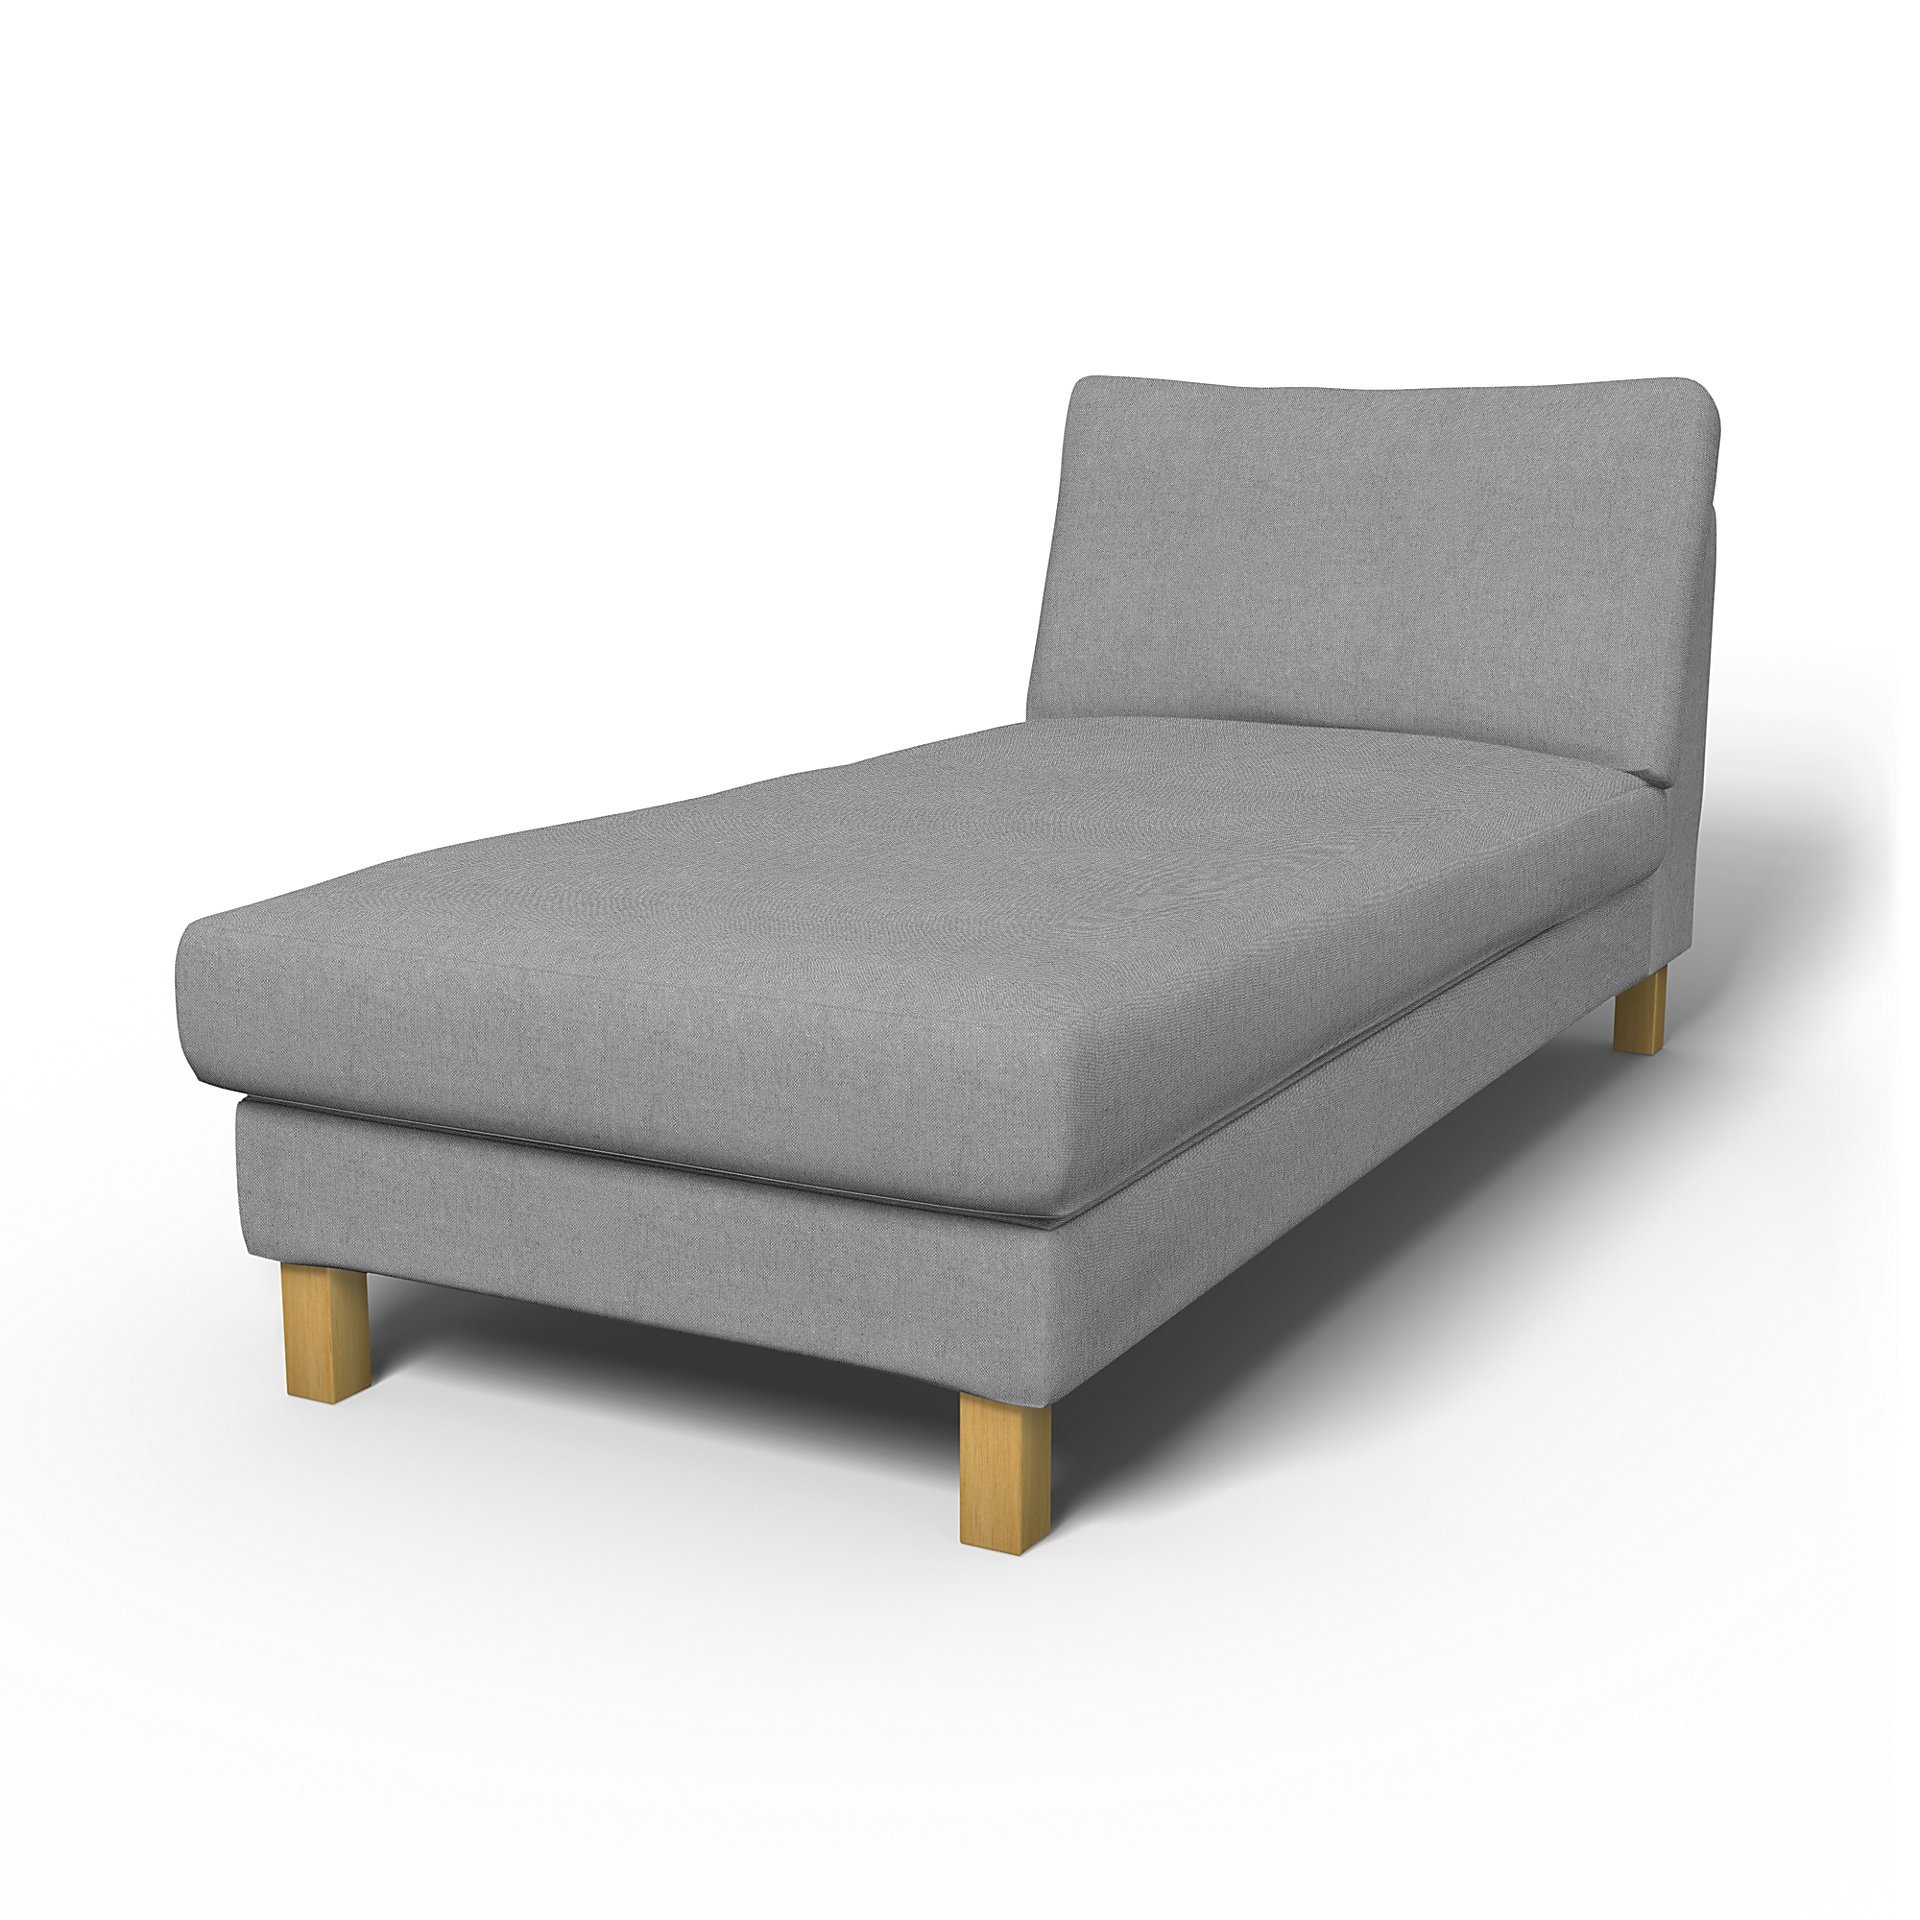 IKEA - Karlstad Stand Alone Chaise Longue Cover, Graphite, Linen - Bemz